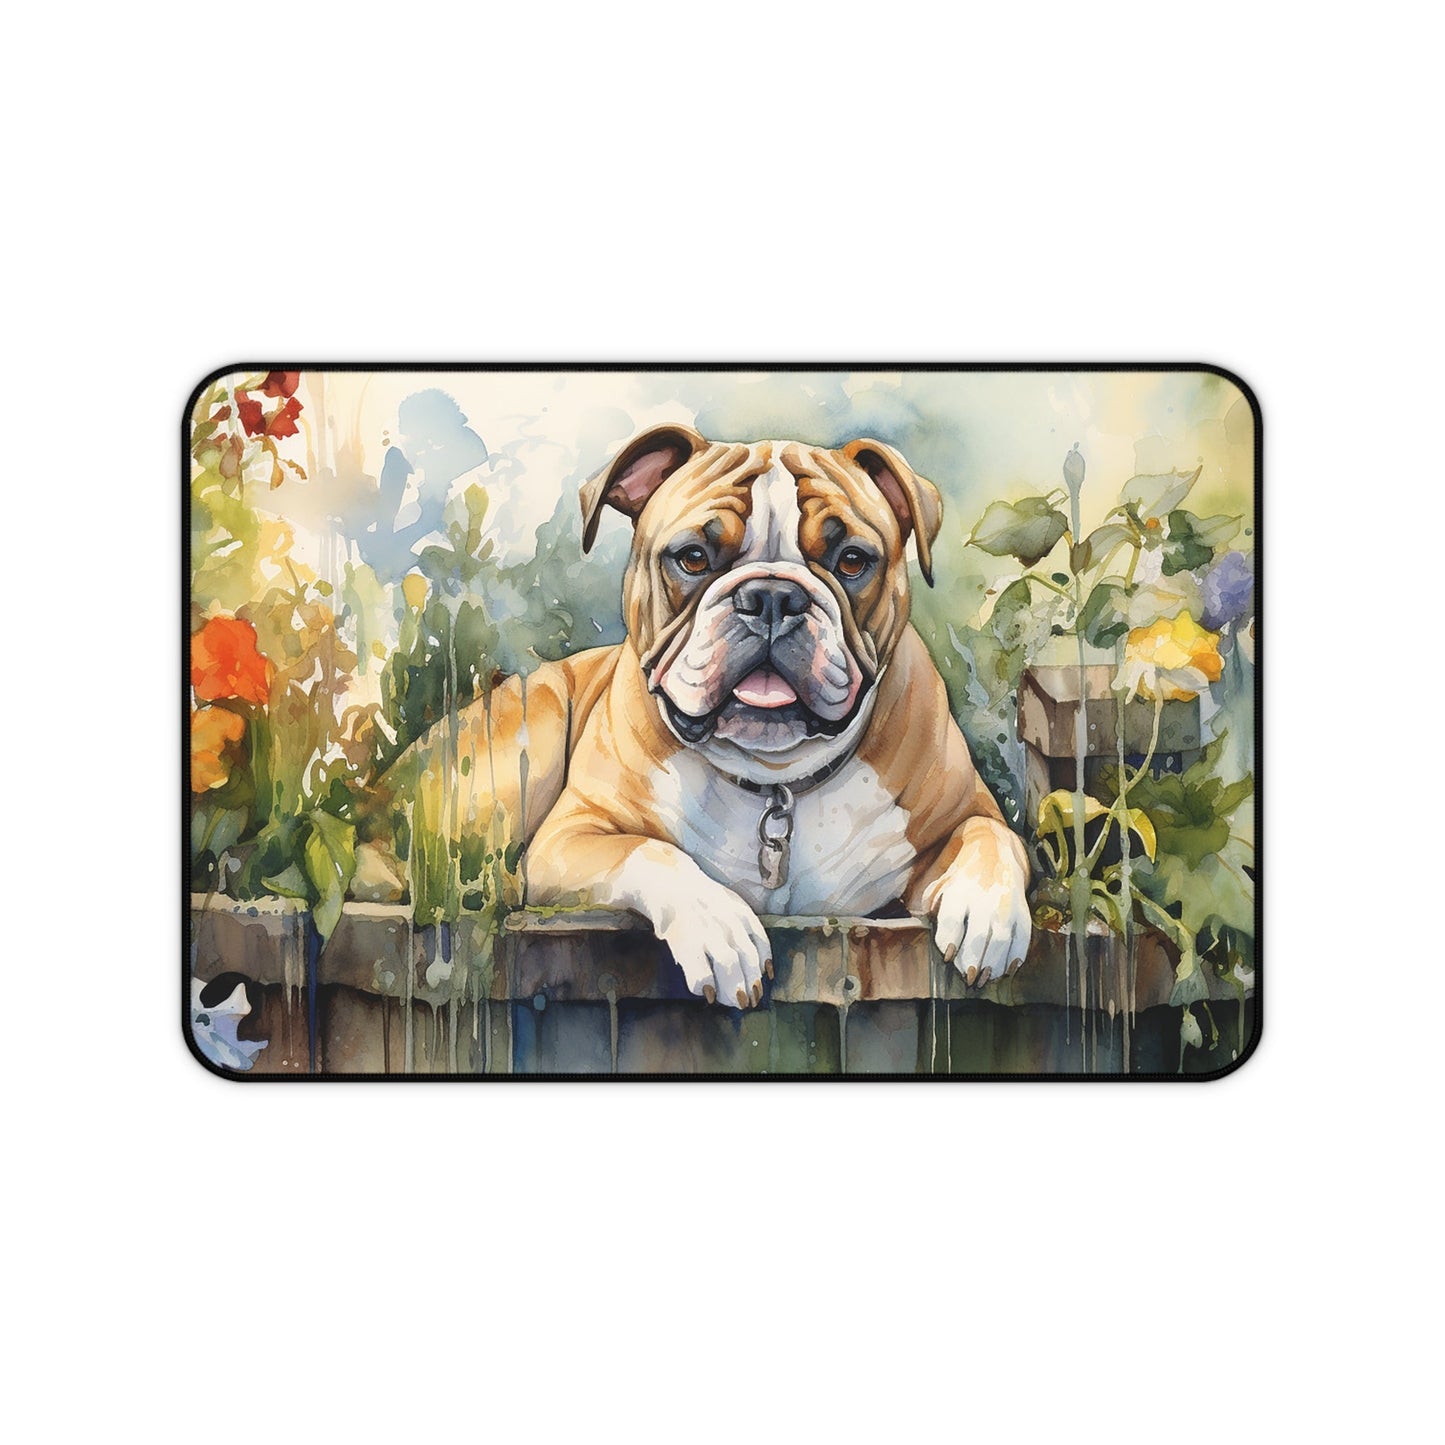 Cute Bulldog In the Garden Large Mouse Pad, Unique Computer Mouse Mats - FlooredByArt